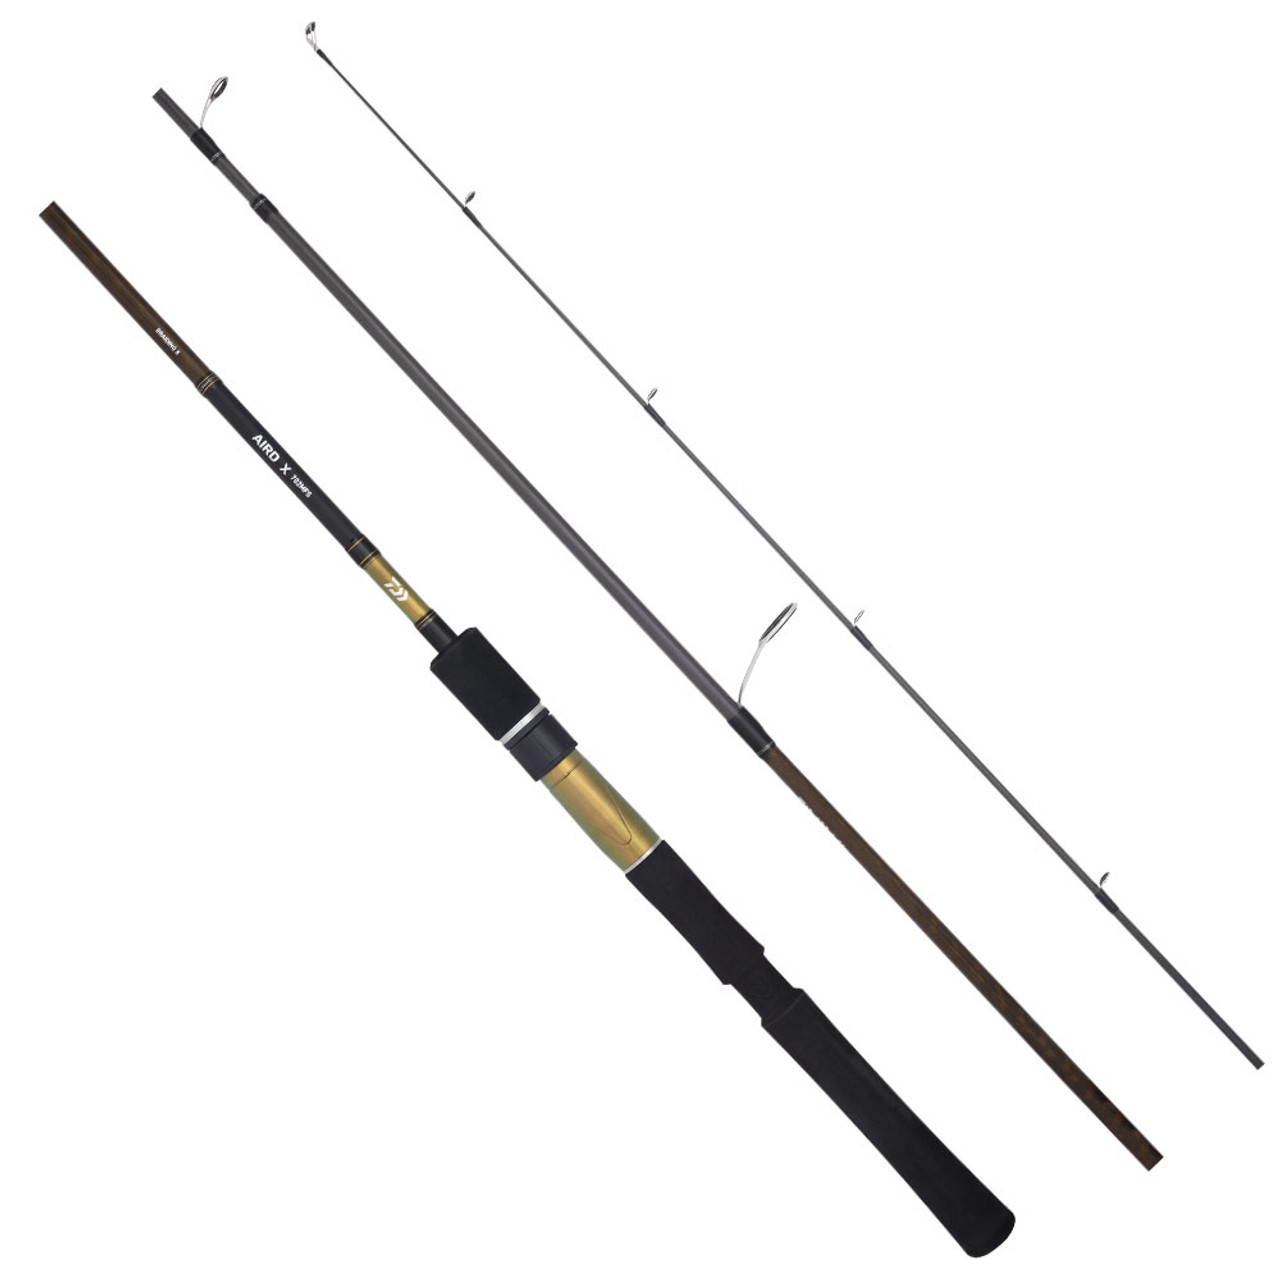 Daiwa Aird X Fishing Rods For Sale